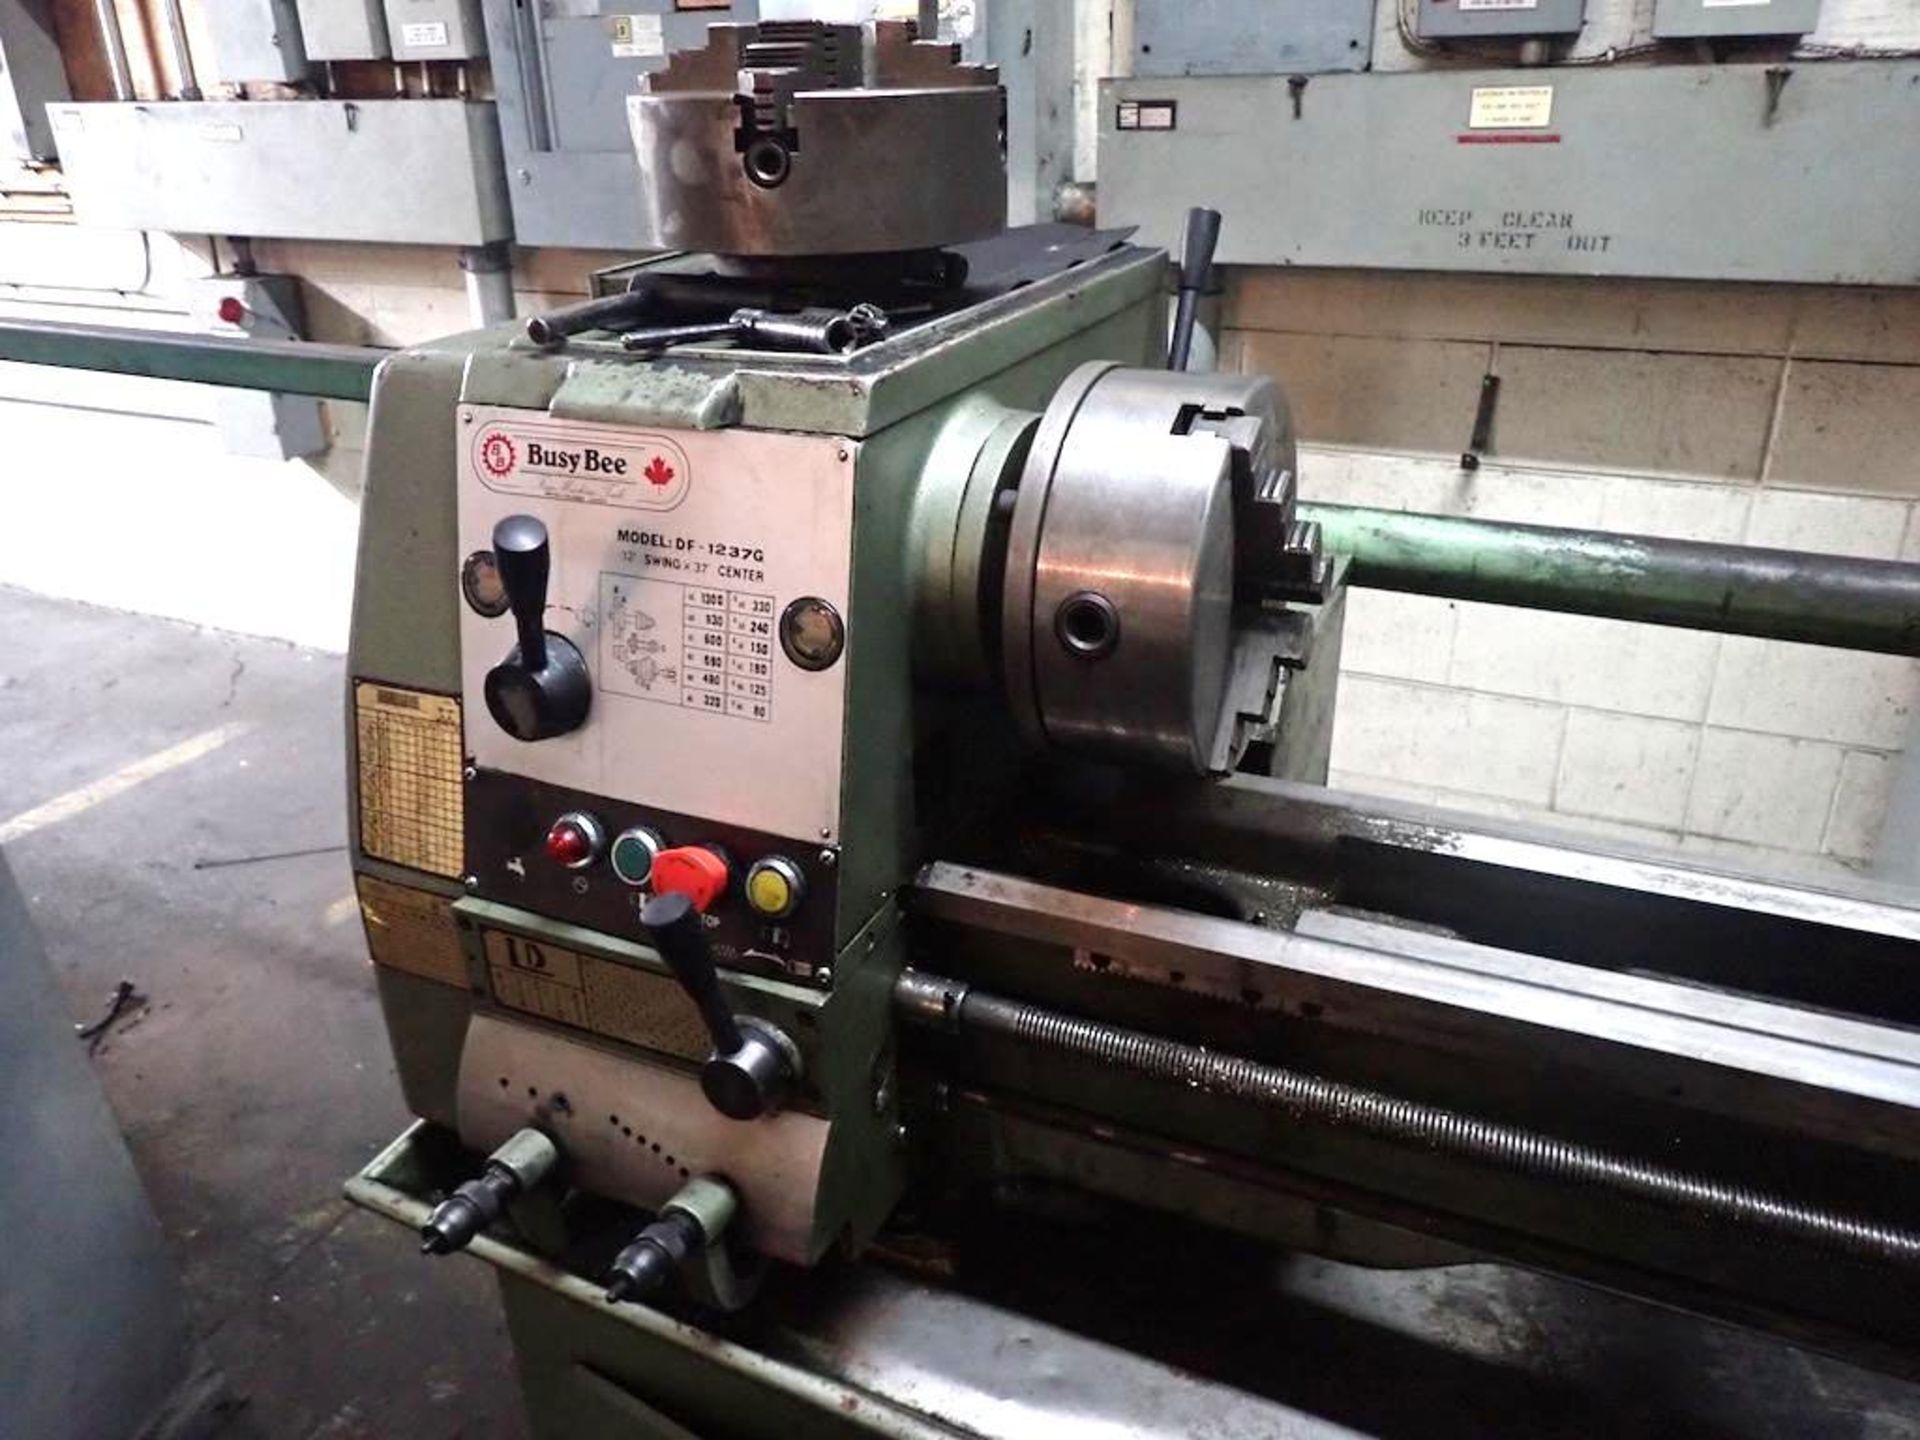 BUSY BEE MOD. DF-1237G 12" SWING X 37" CENTERS GAP BED LATHE S/N: 8010281 - Image 2 of 4